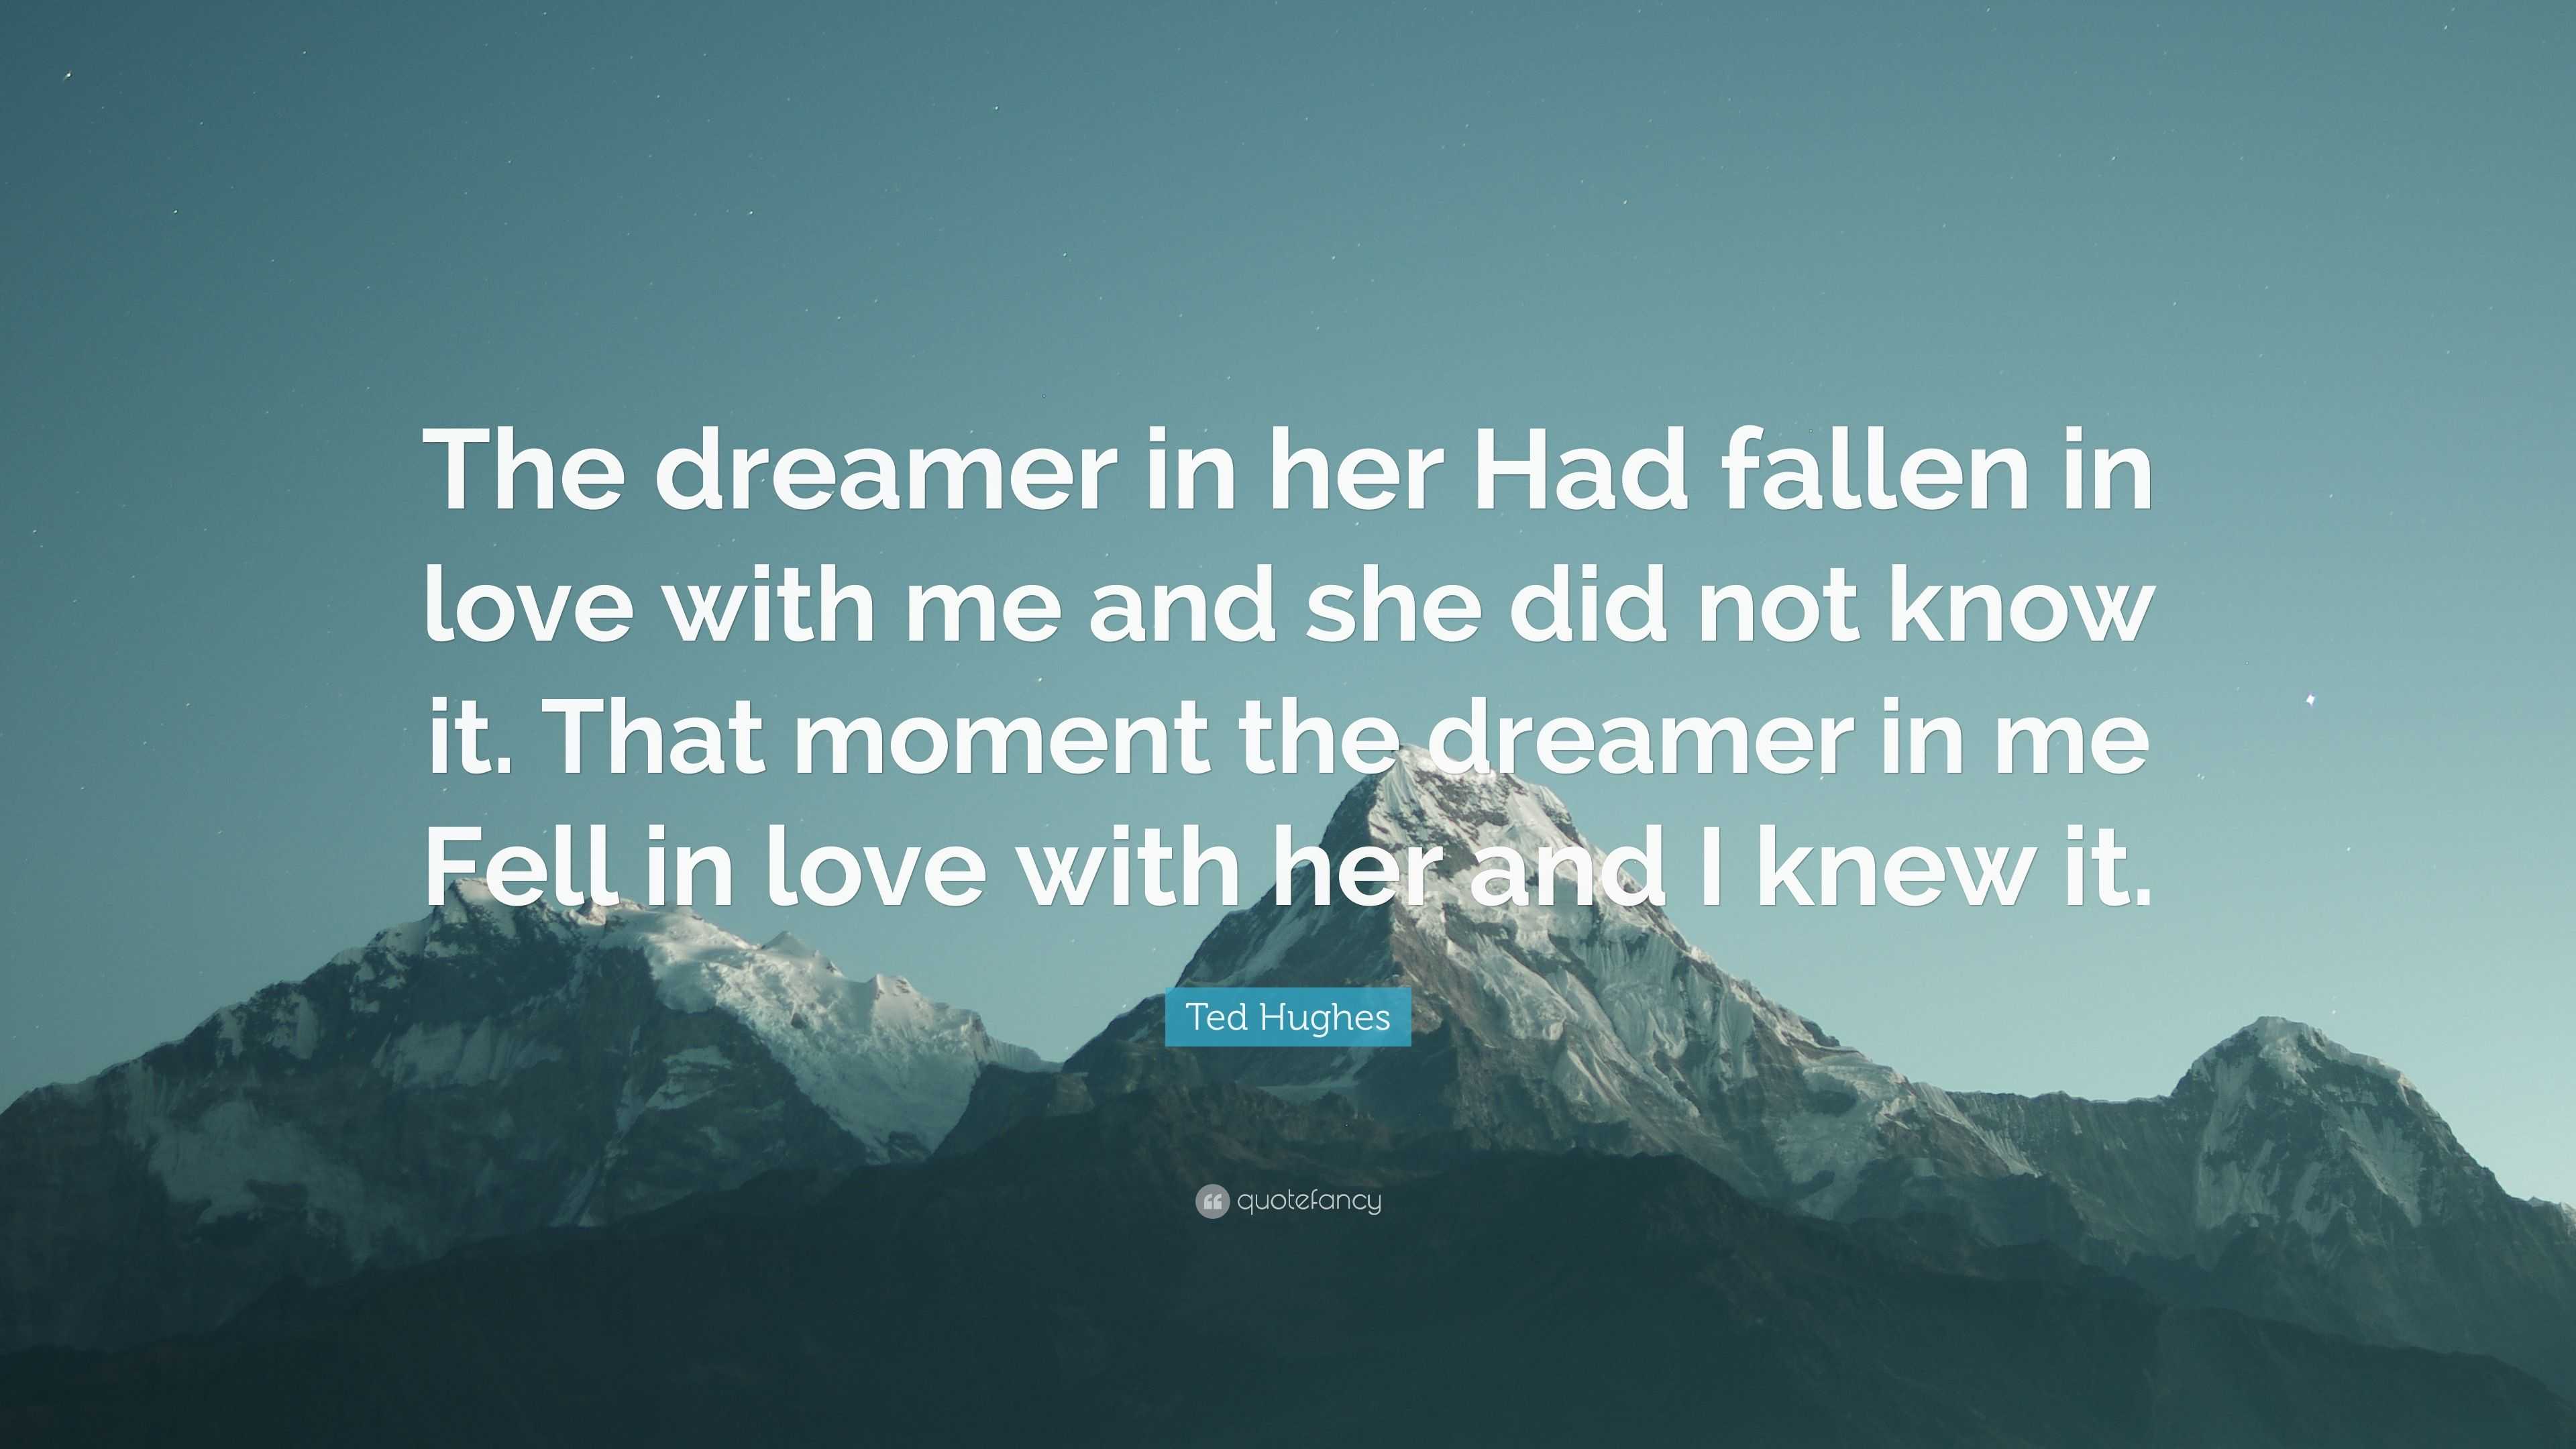 Ted Hughes Quote: “The dreamer in her Had fallen in love with me and ...